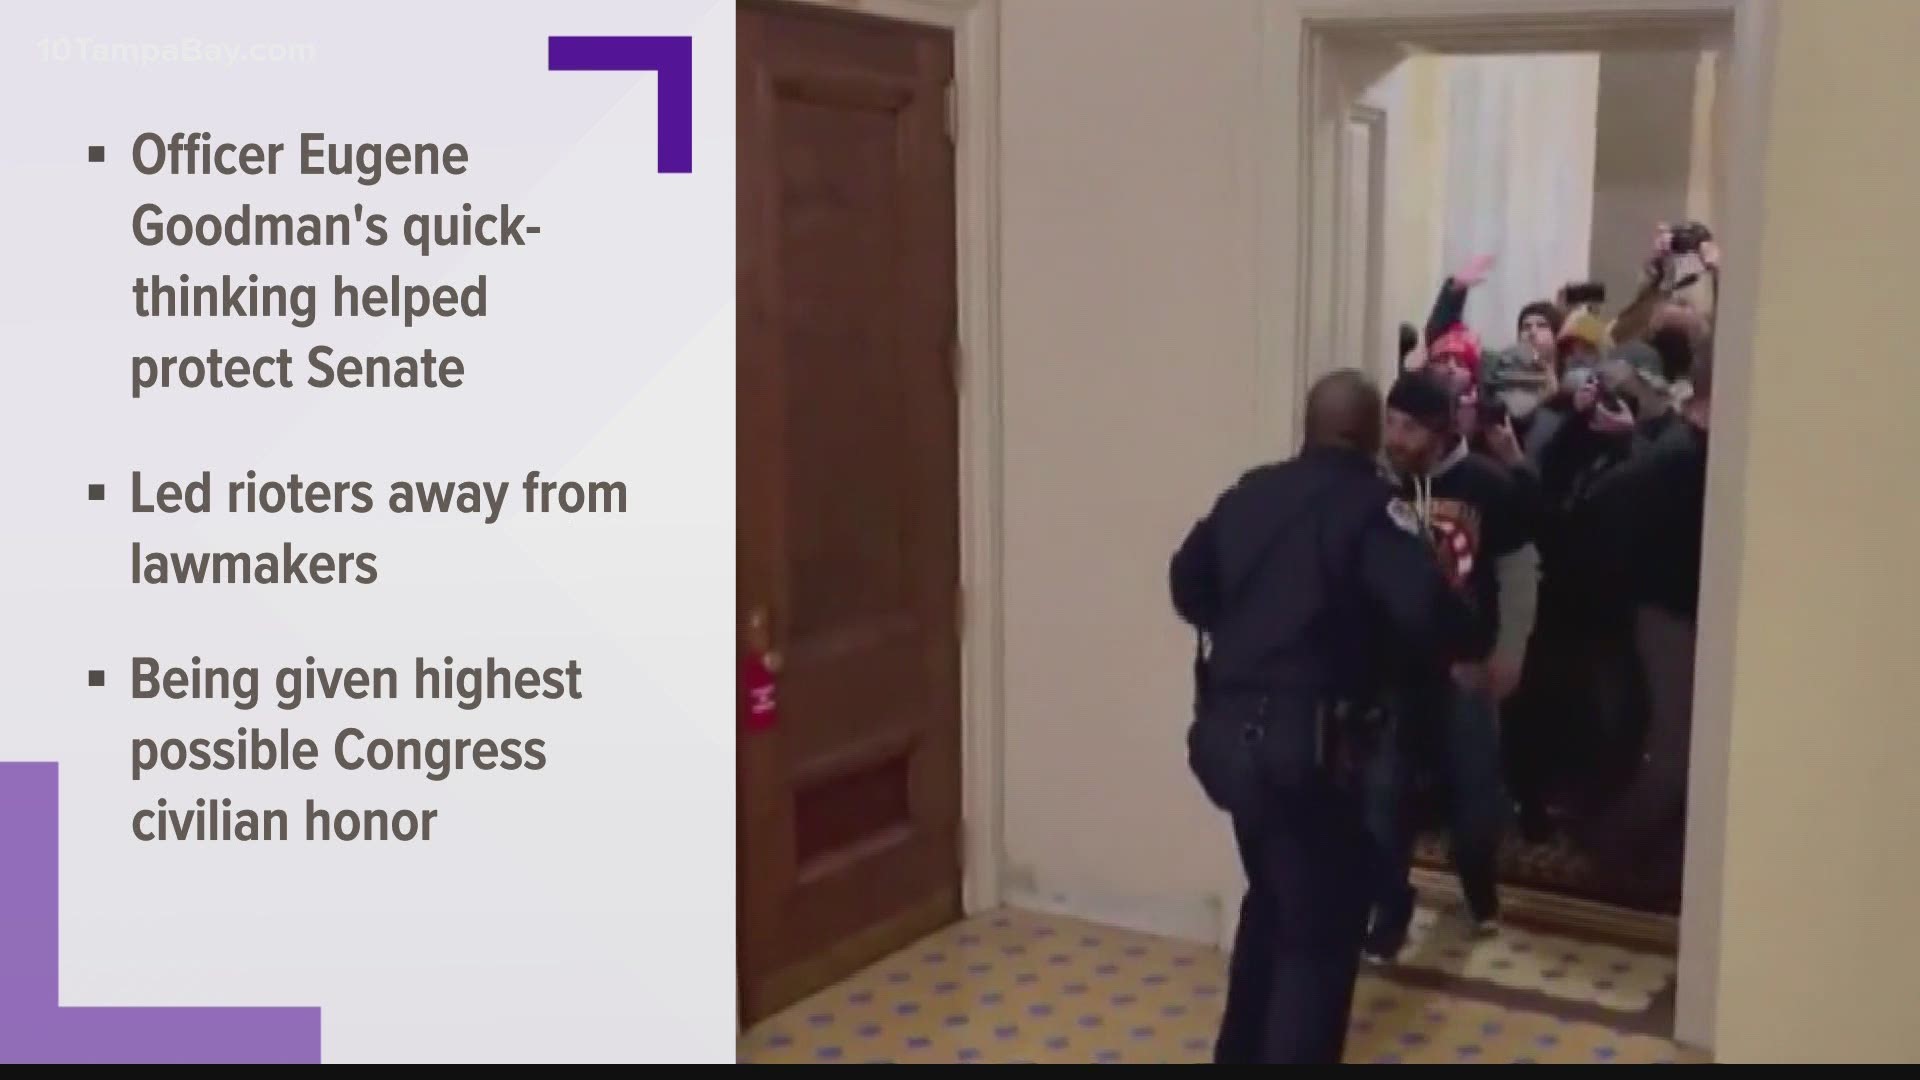 Officer Eugene Goodman was seen on video using quick-thinking to protect the Senate chambers from a mob of Trump supporters.